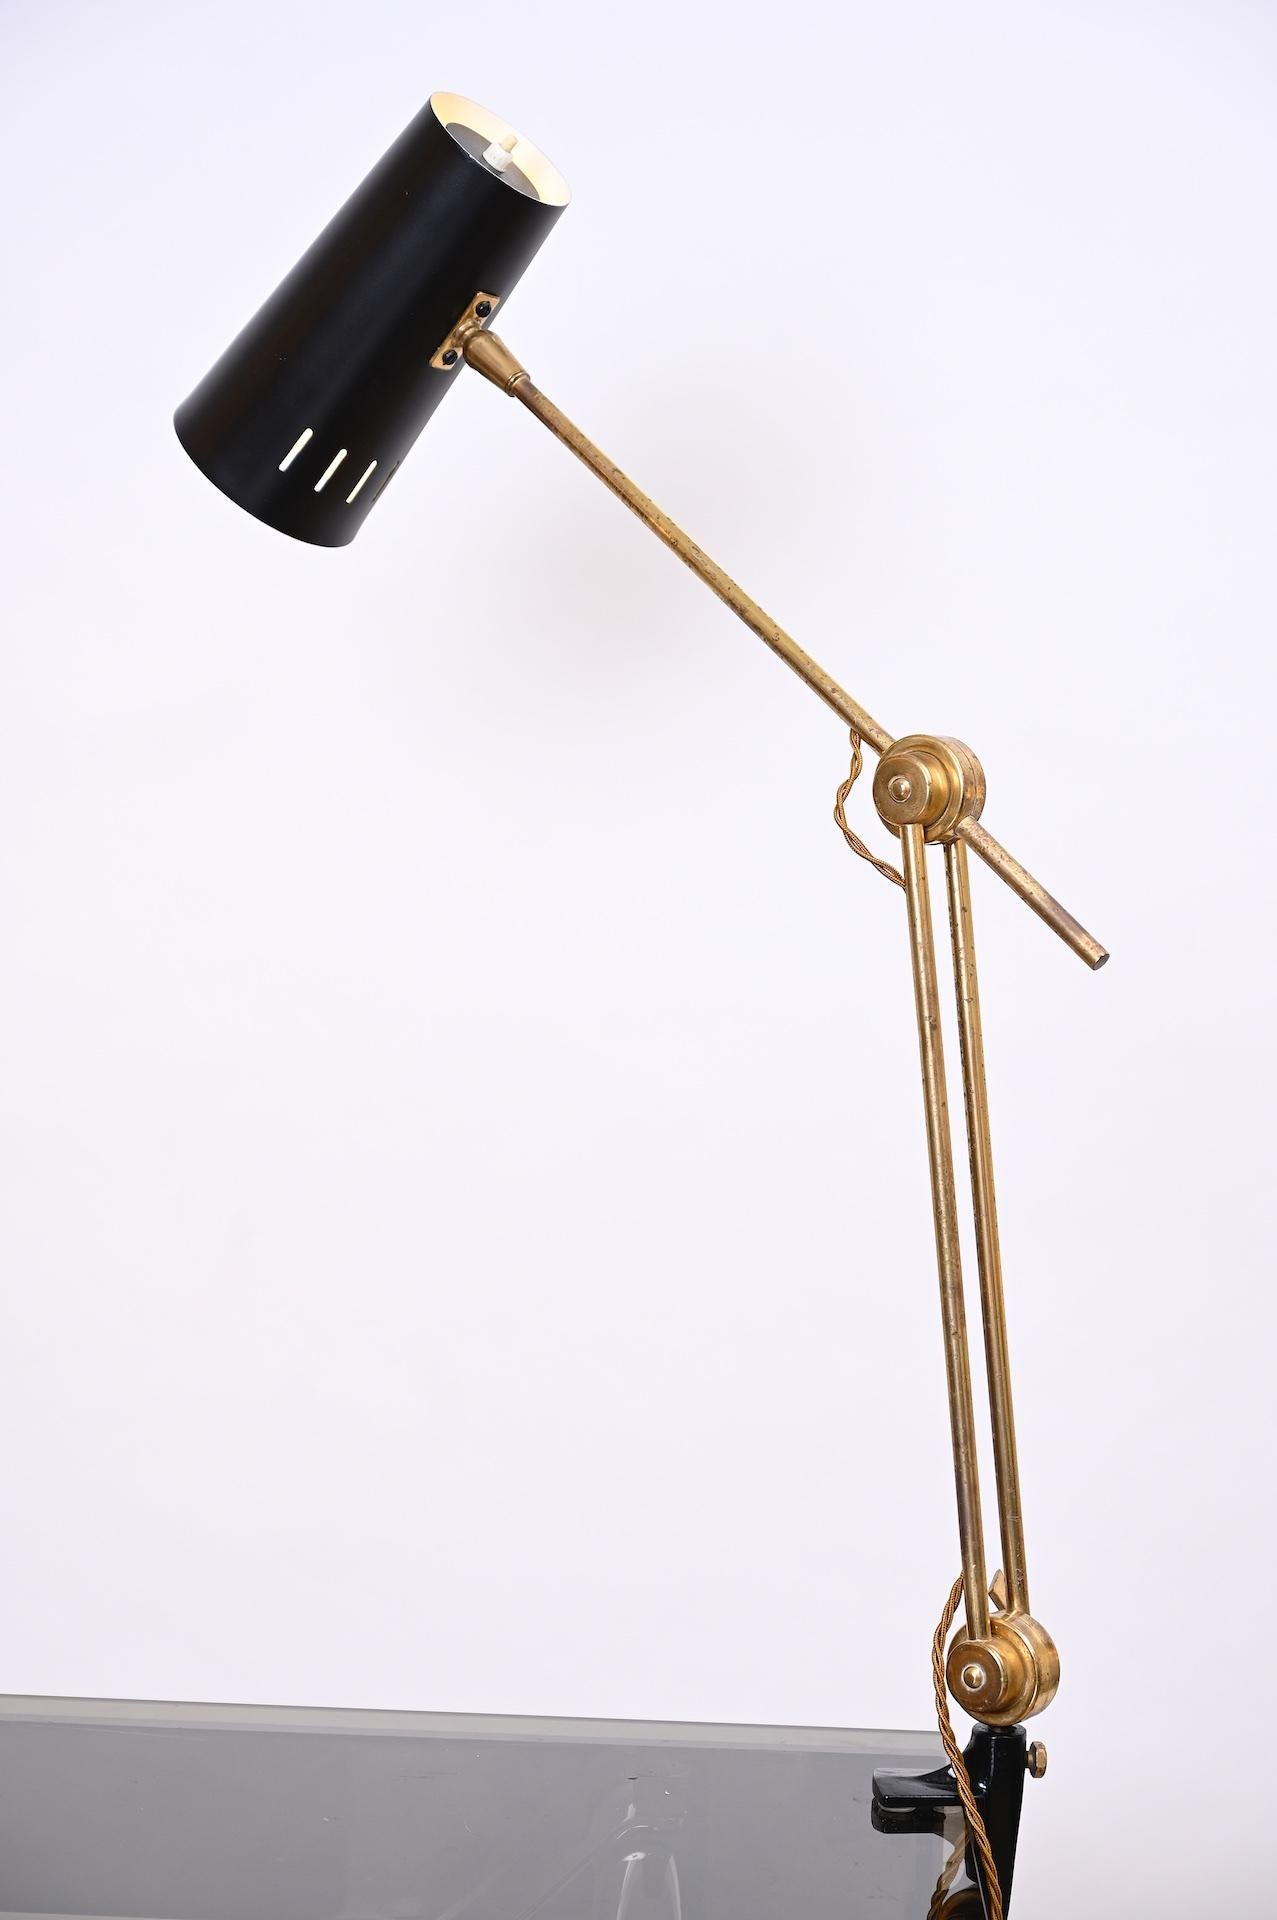 Rare Stilnovo articulated desk lamp with black shade.

Brass has nice patina and the lamp has been rewired.